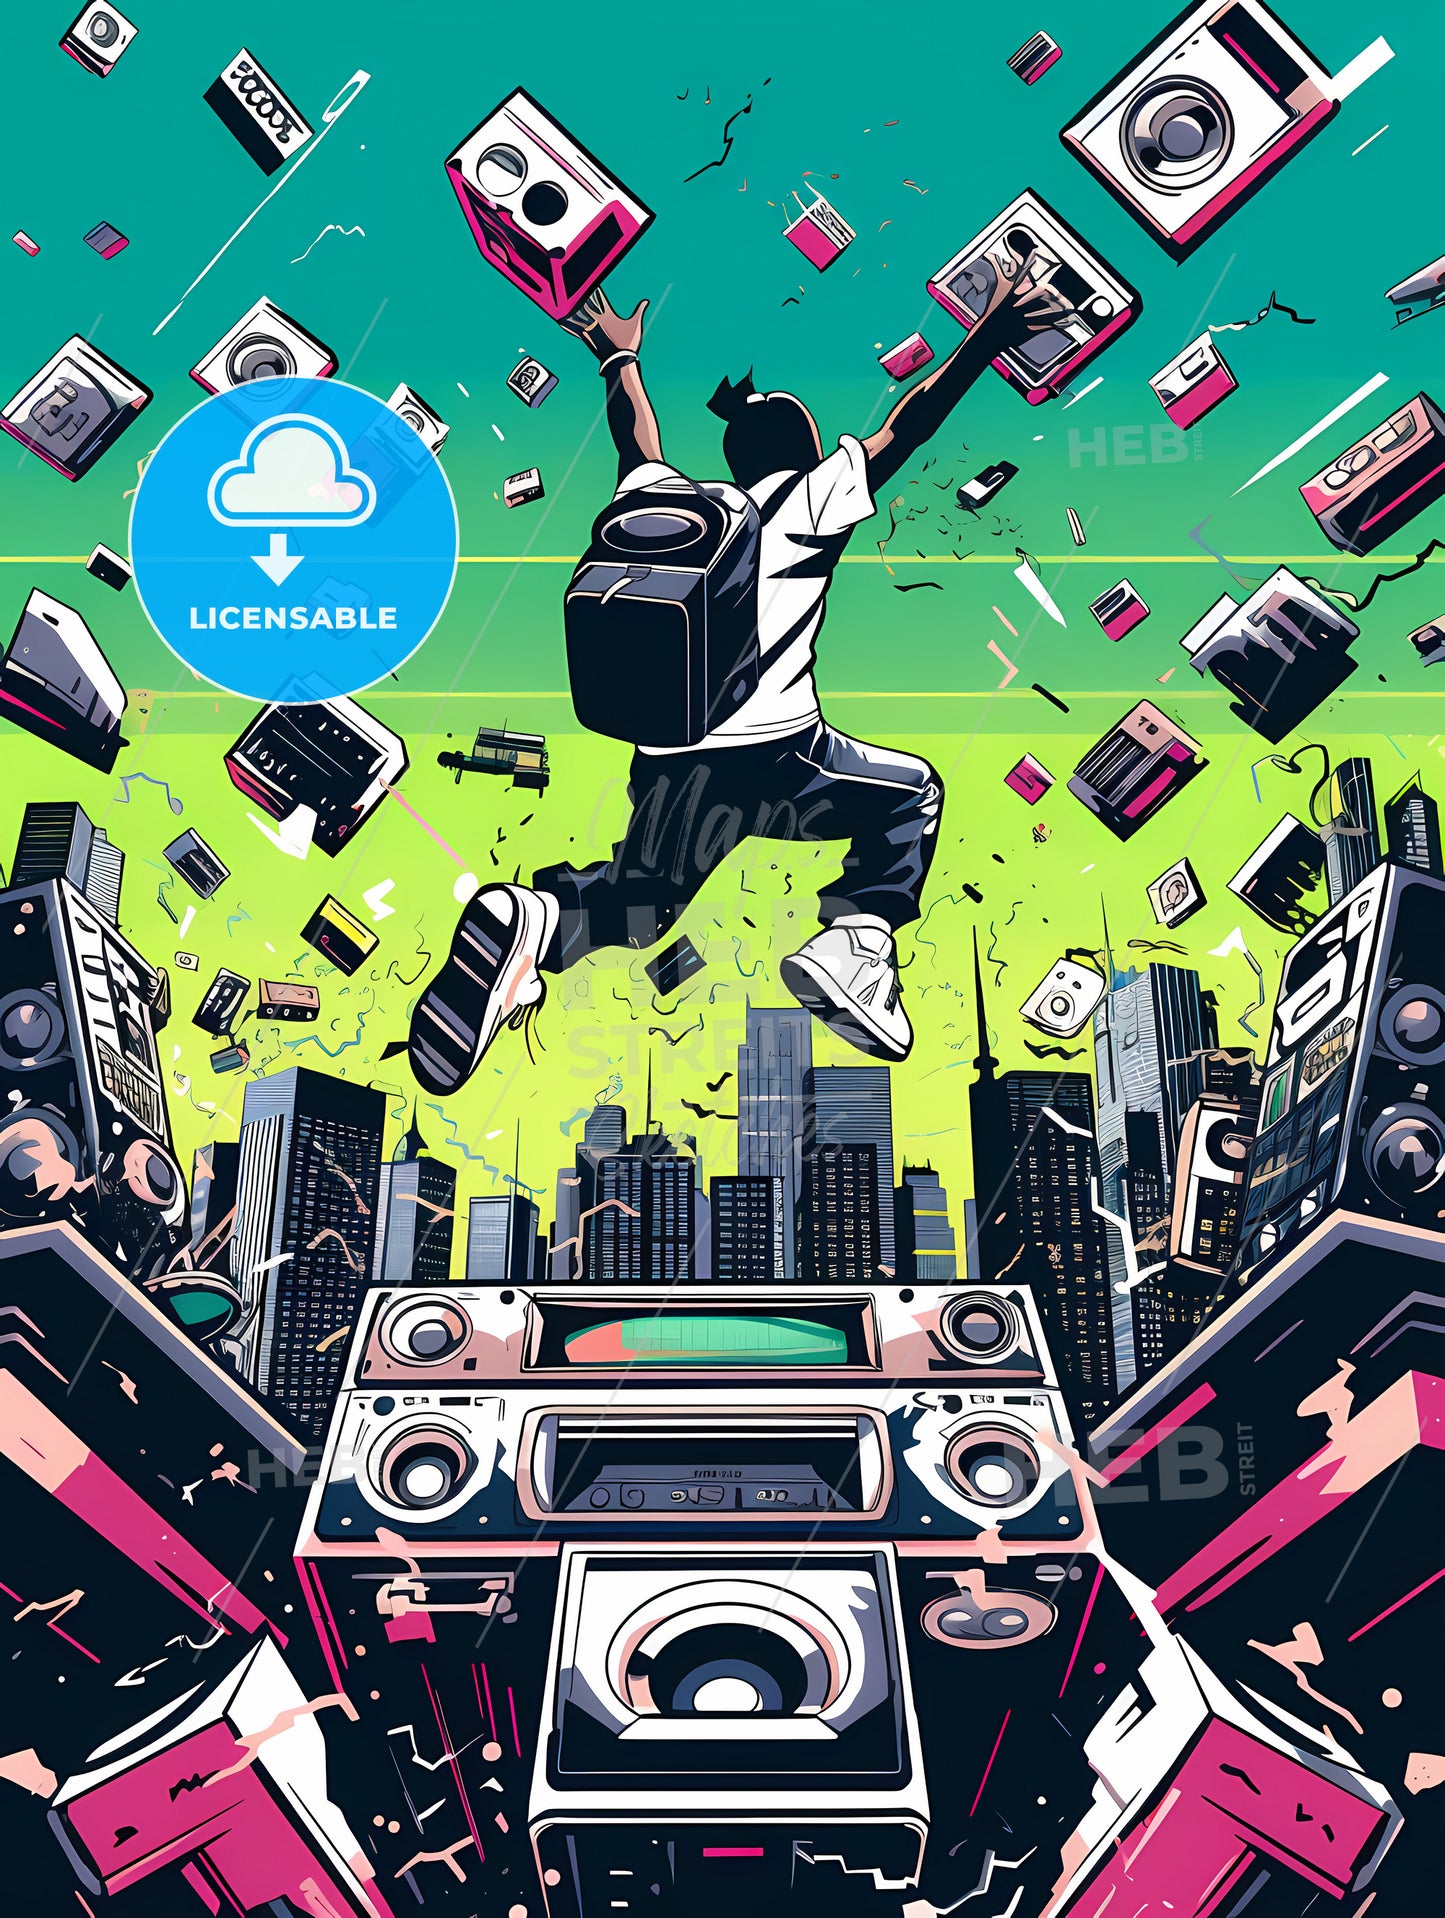 An Illustration Of 80S Rap Song, A Man Jumping In The Air With A Boom Box And Many Speakers